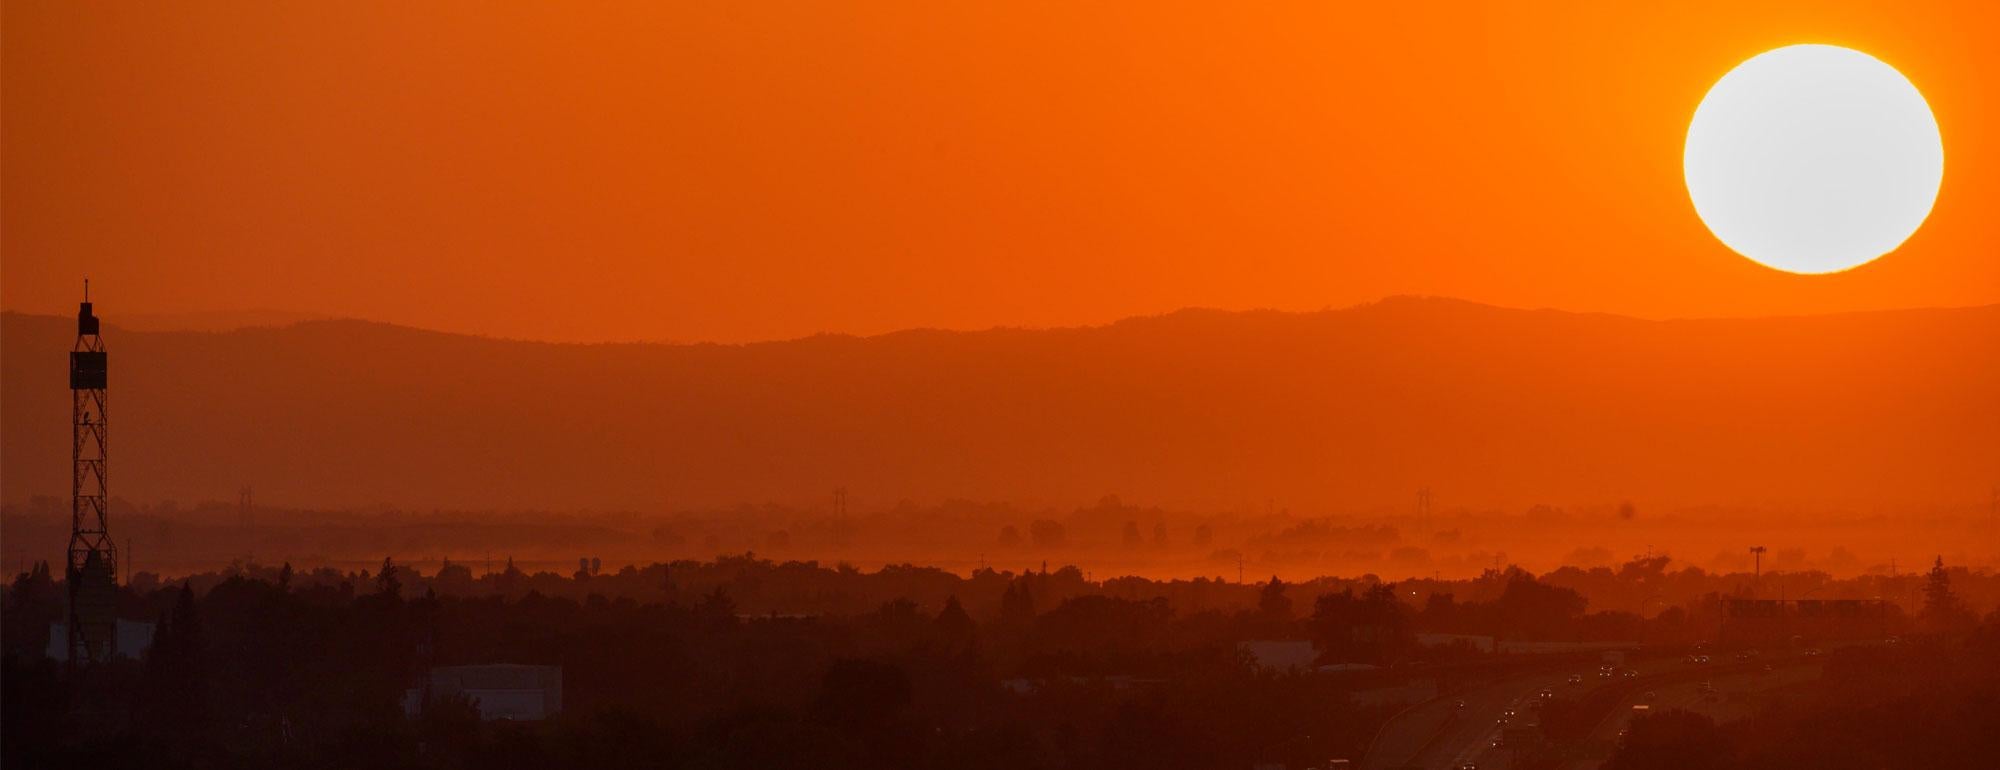 The sun sets over a extremely hot day in the Sacramento region.